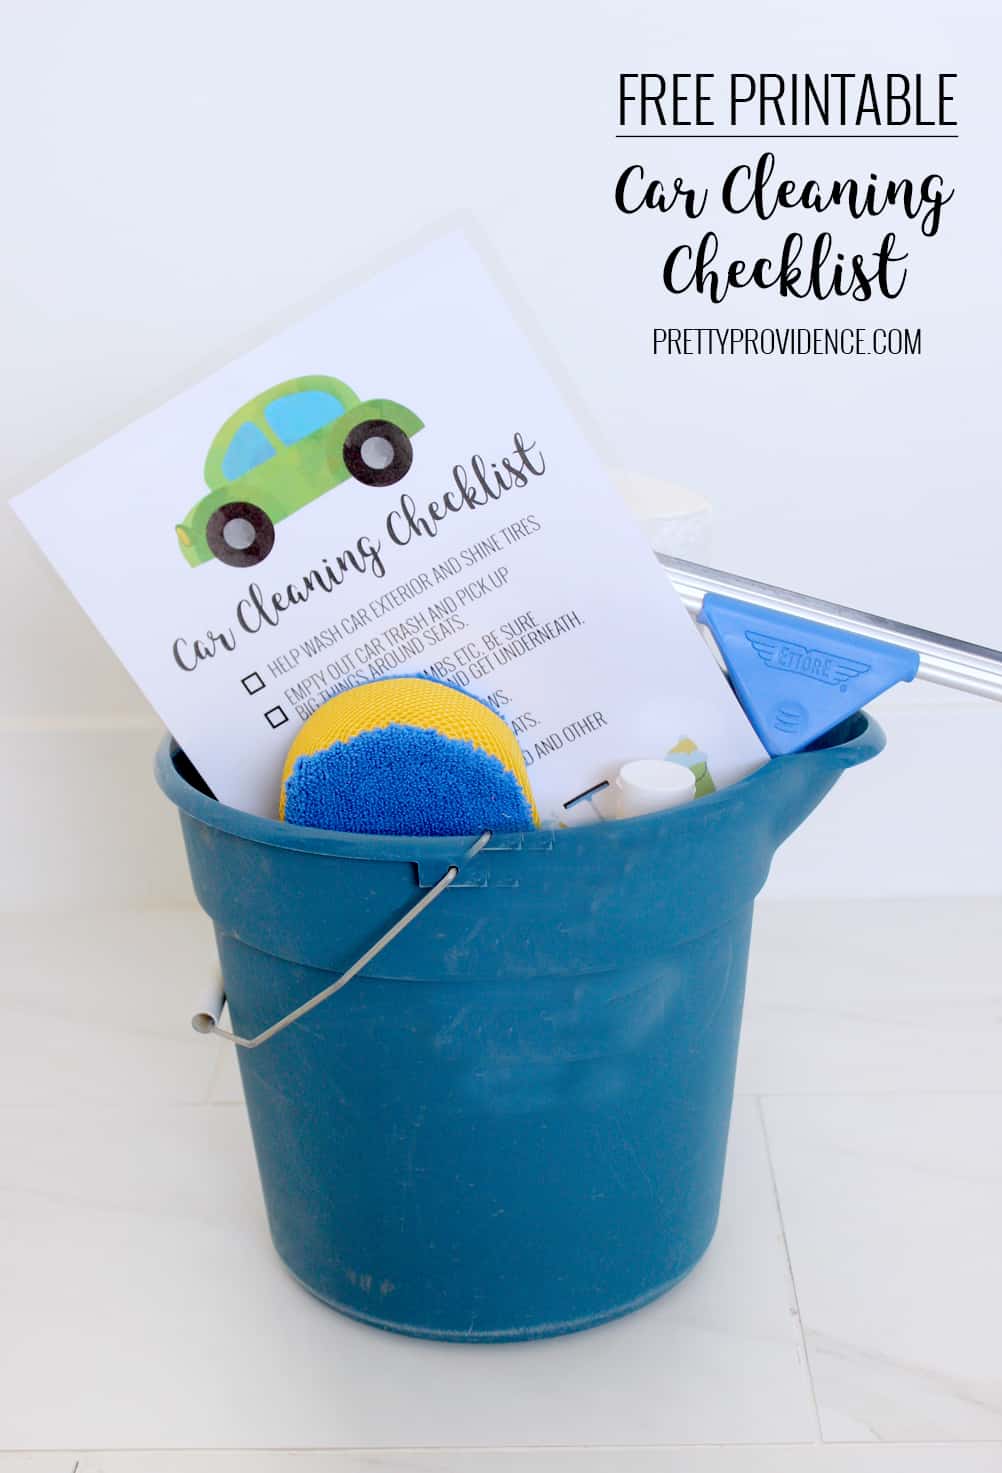 Car cleaning checklist - this is a great way to teach your kids how to clean a car! 